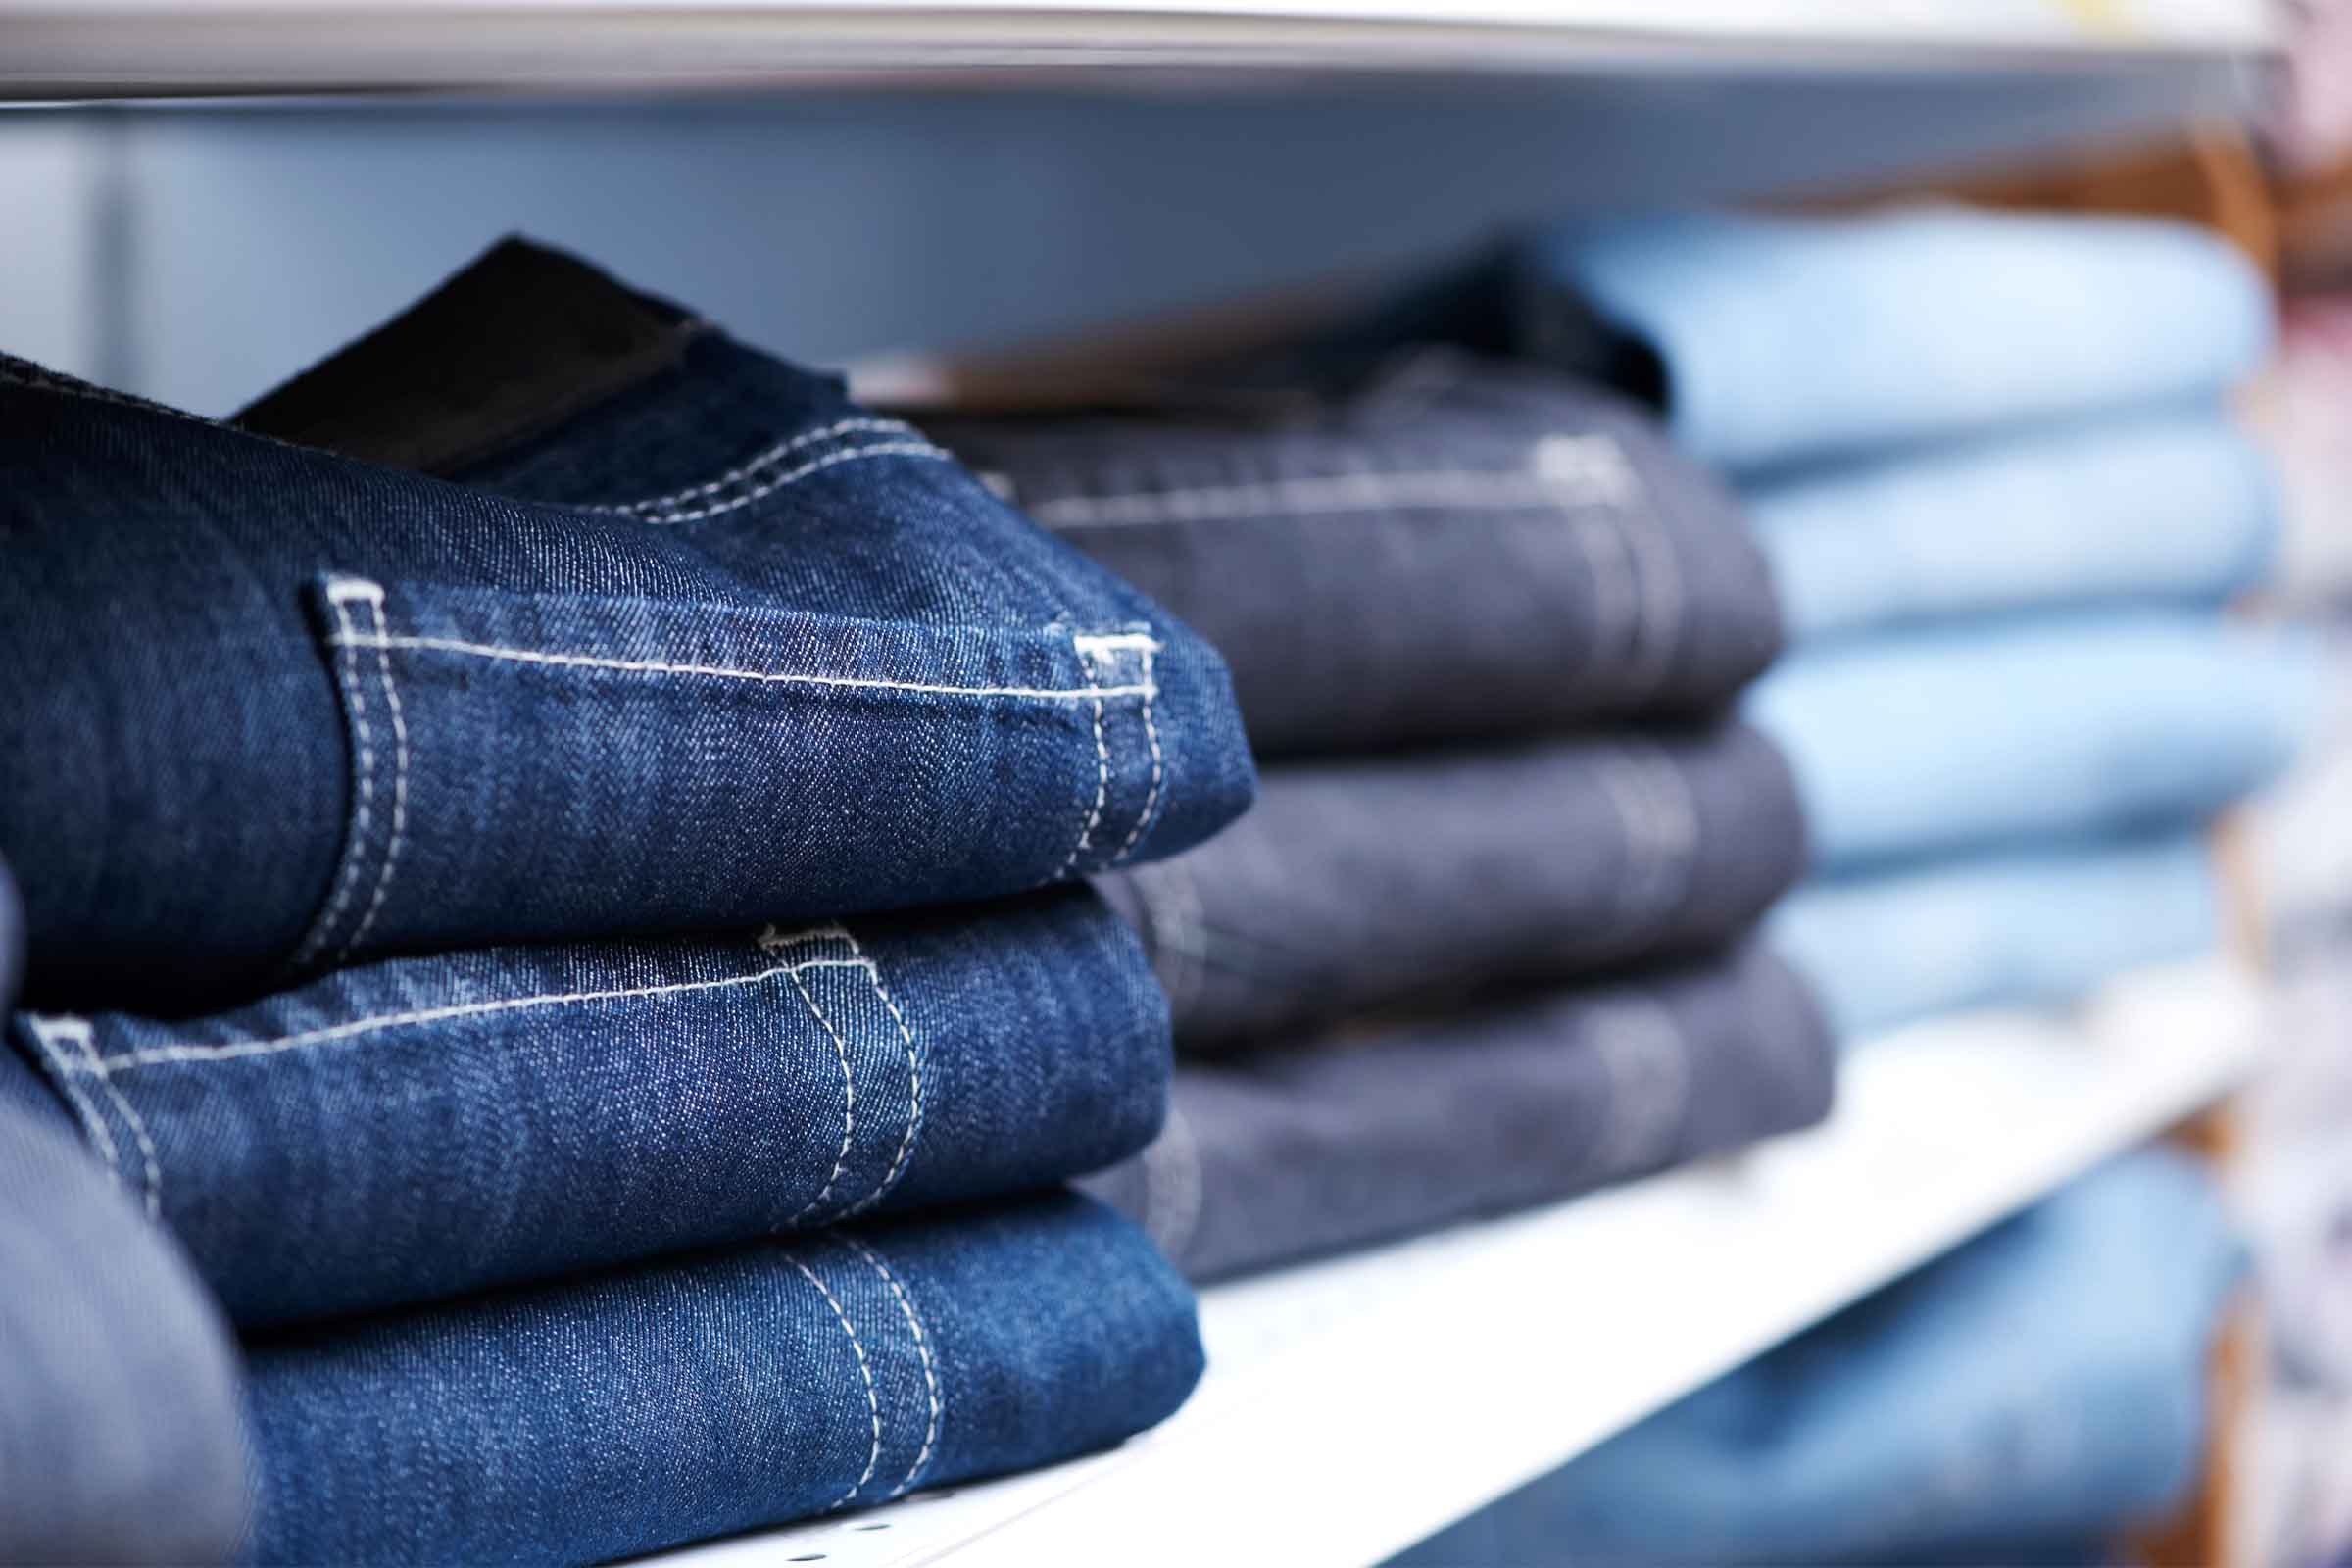 Jeans Manufacturing Business Investment Opportunity in Manendragarh, India  seeking INR 12 lakh